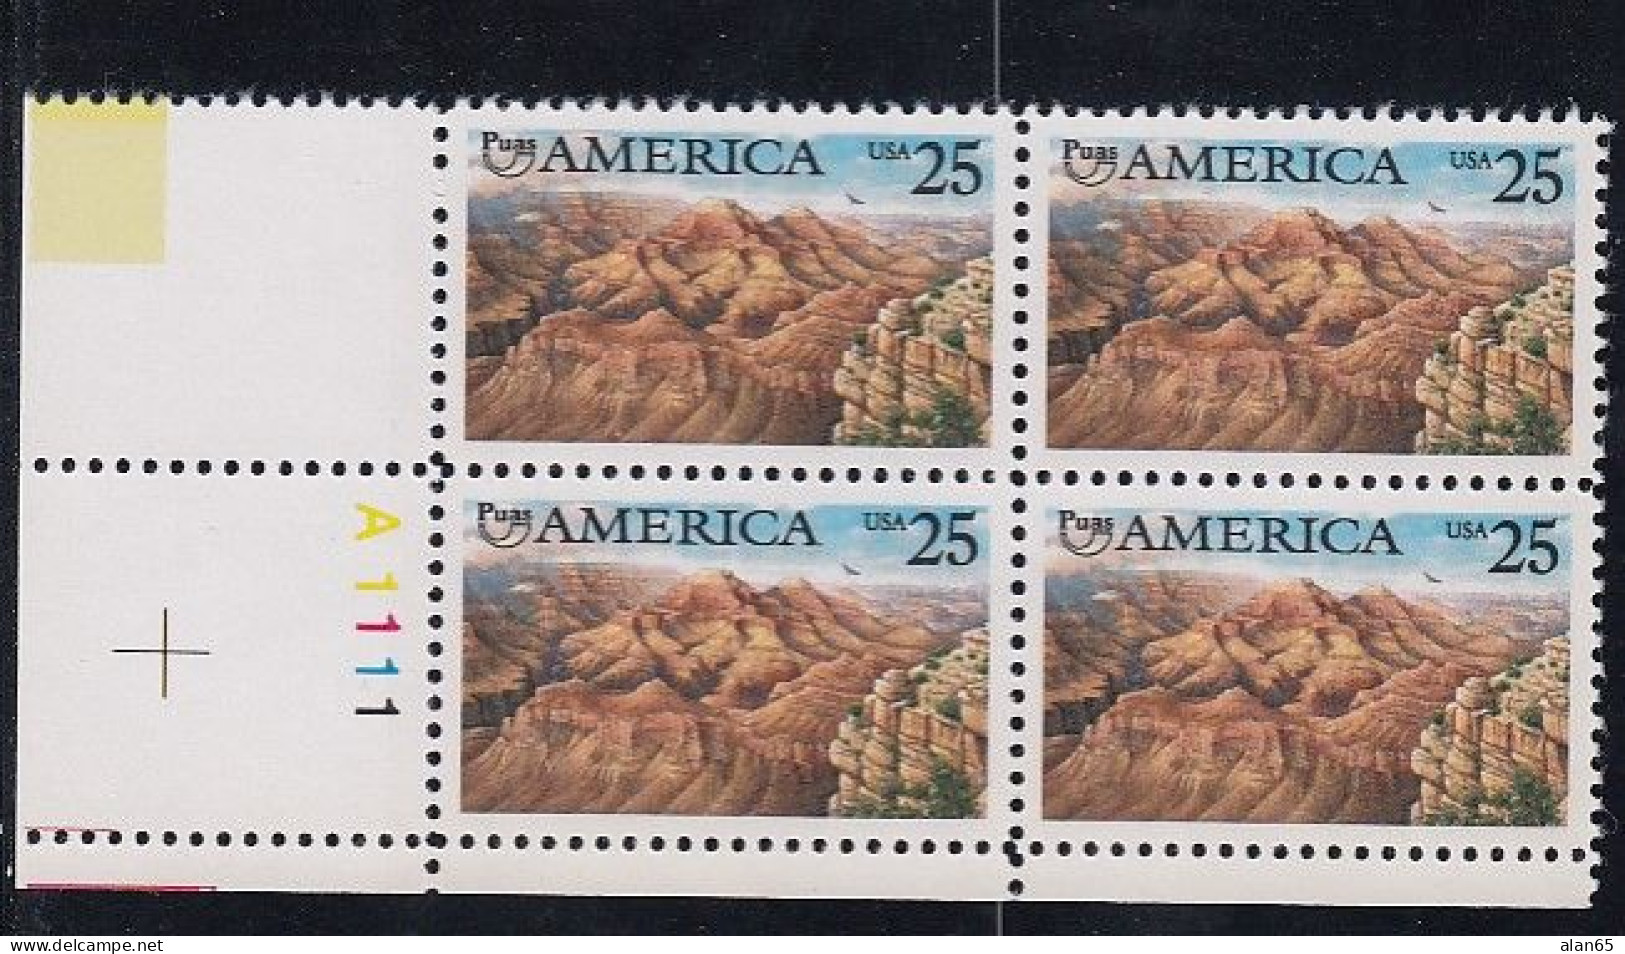 Sc#2512, Pre-Columbian America, Grand Canyon, 25-cent 1990 Issue, Plate # Block Of 4 MNH US Postage Stamps - Numéros De Planches